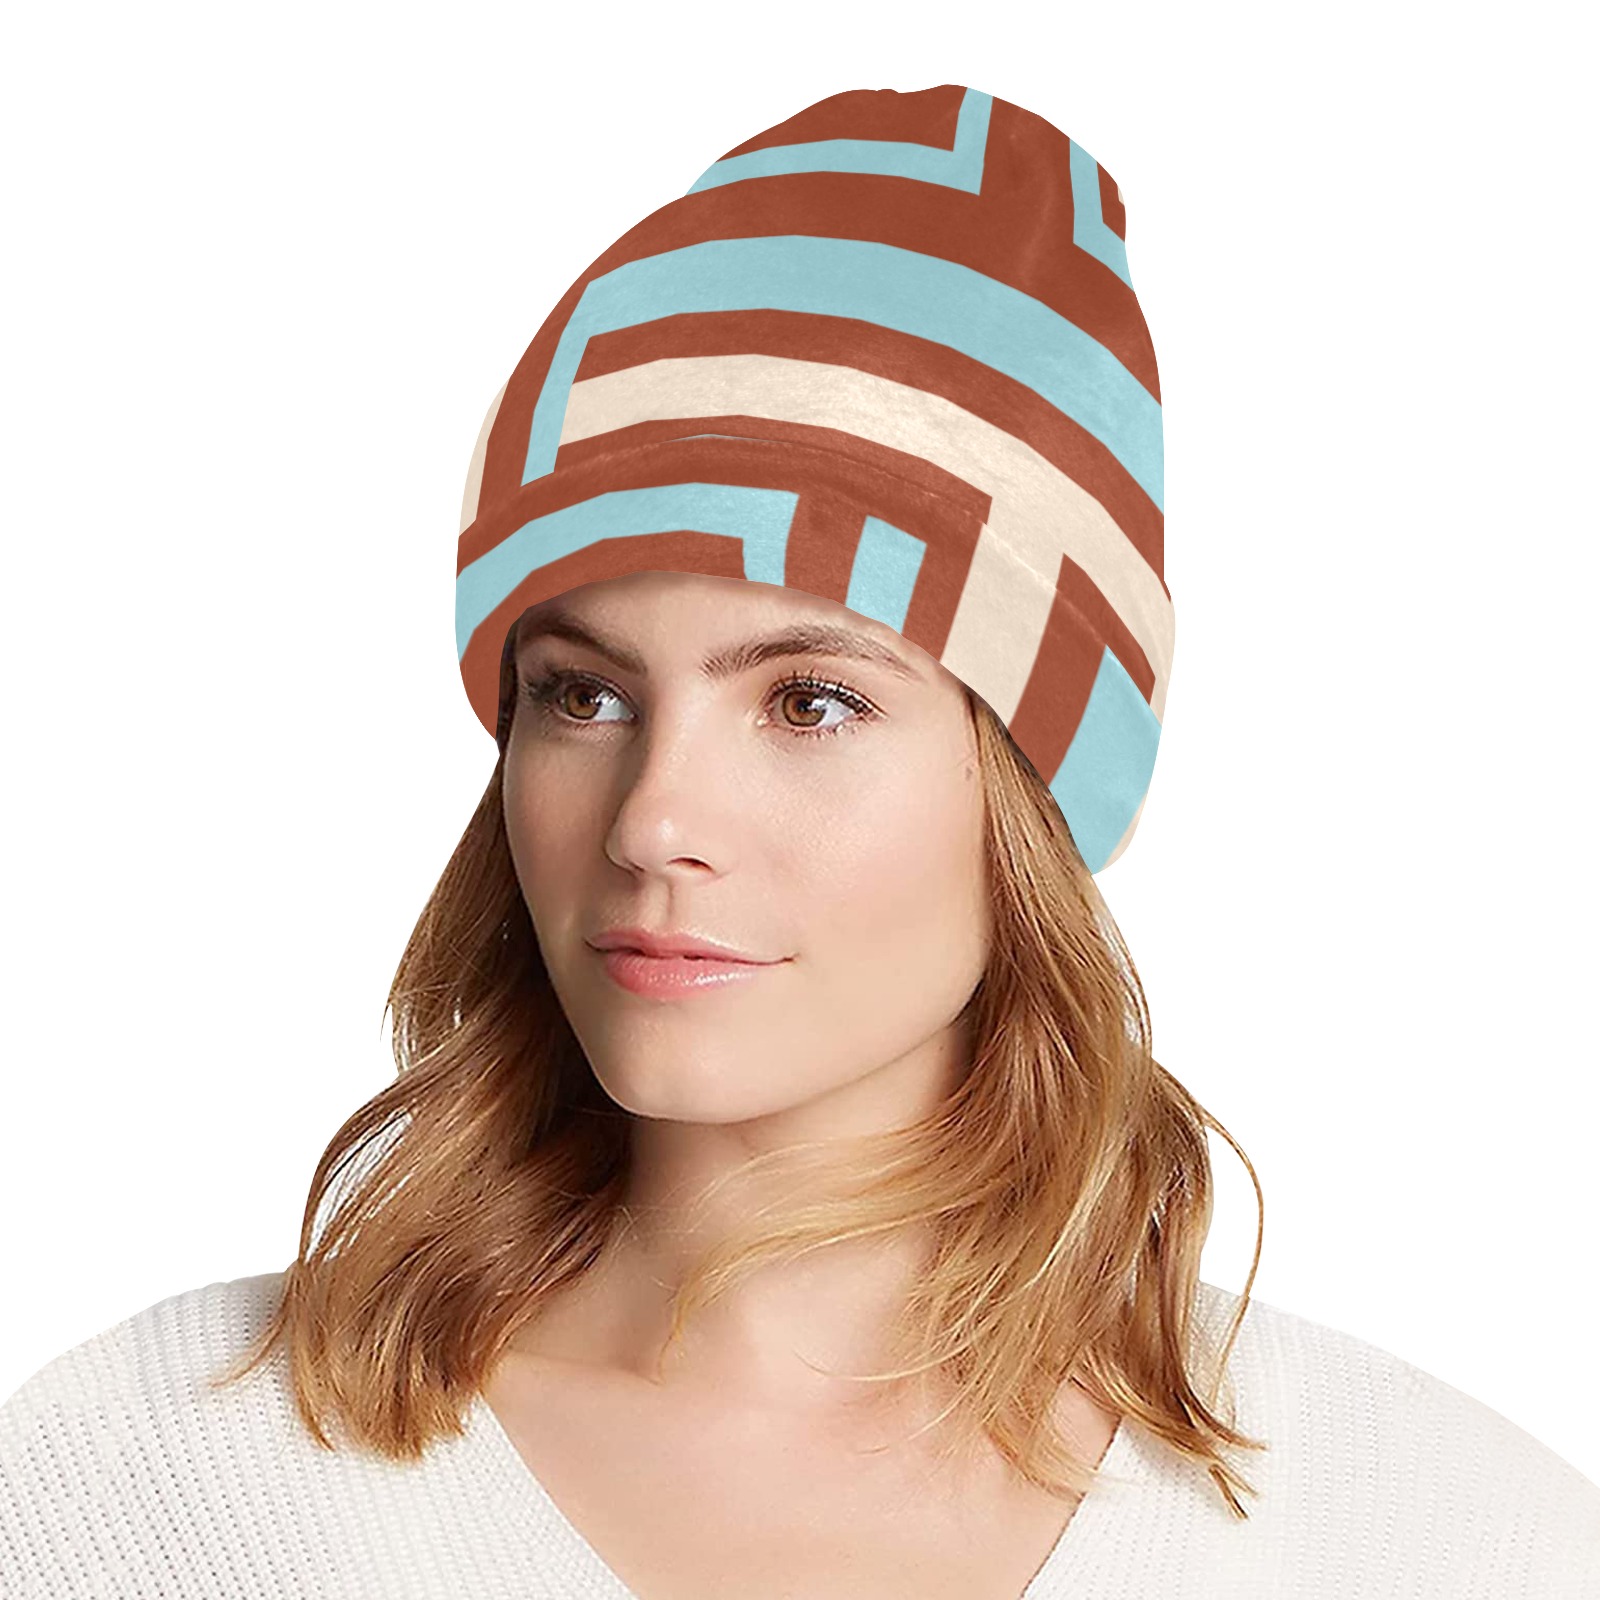 Model 1 All Over Print Beanie for Adults